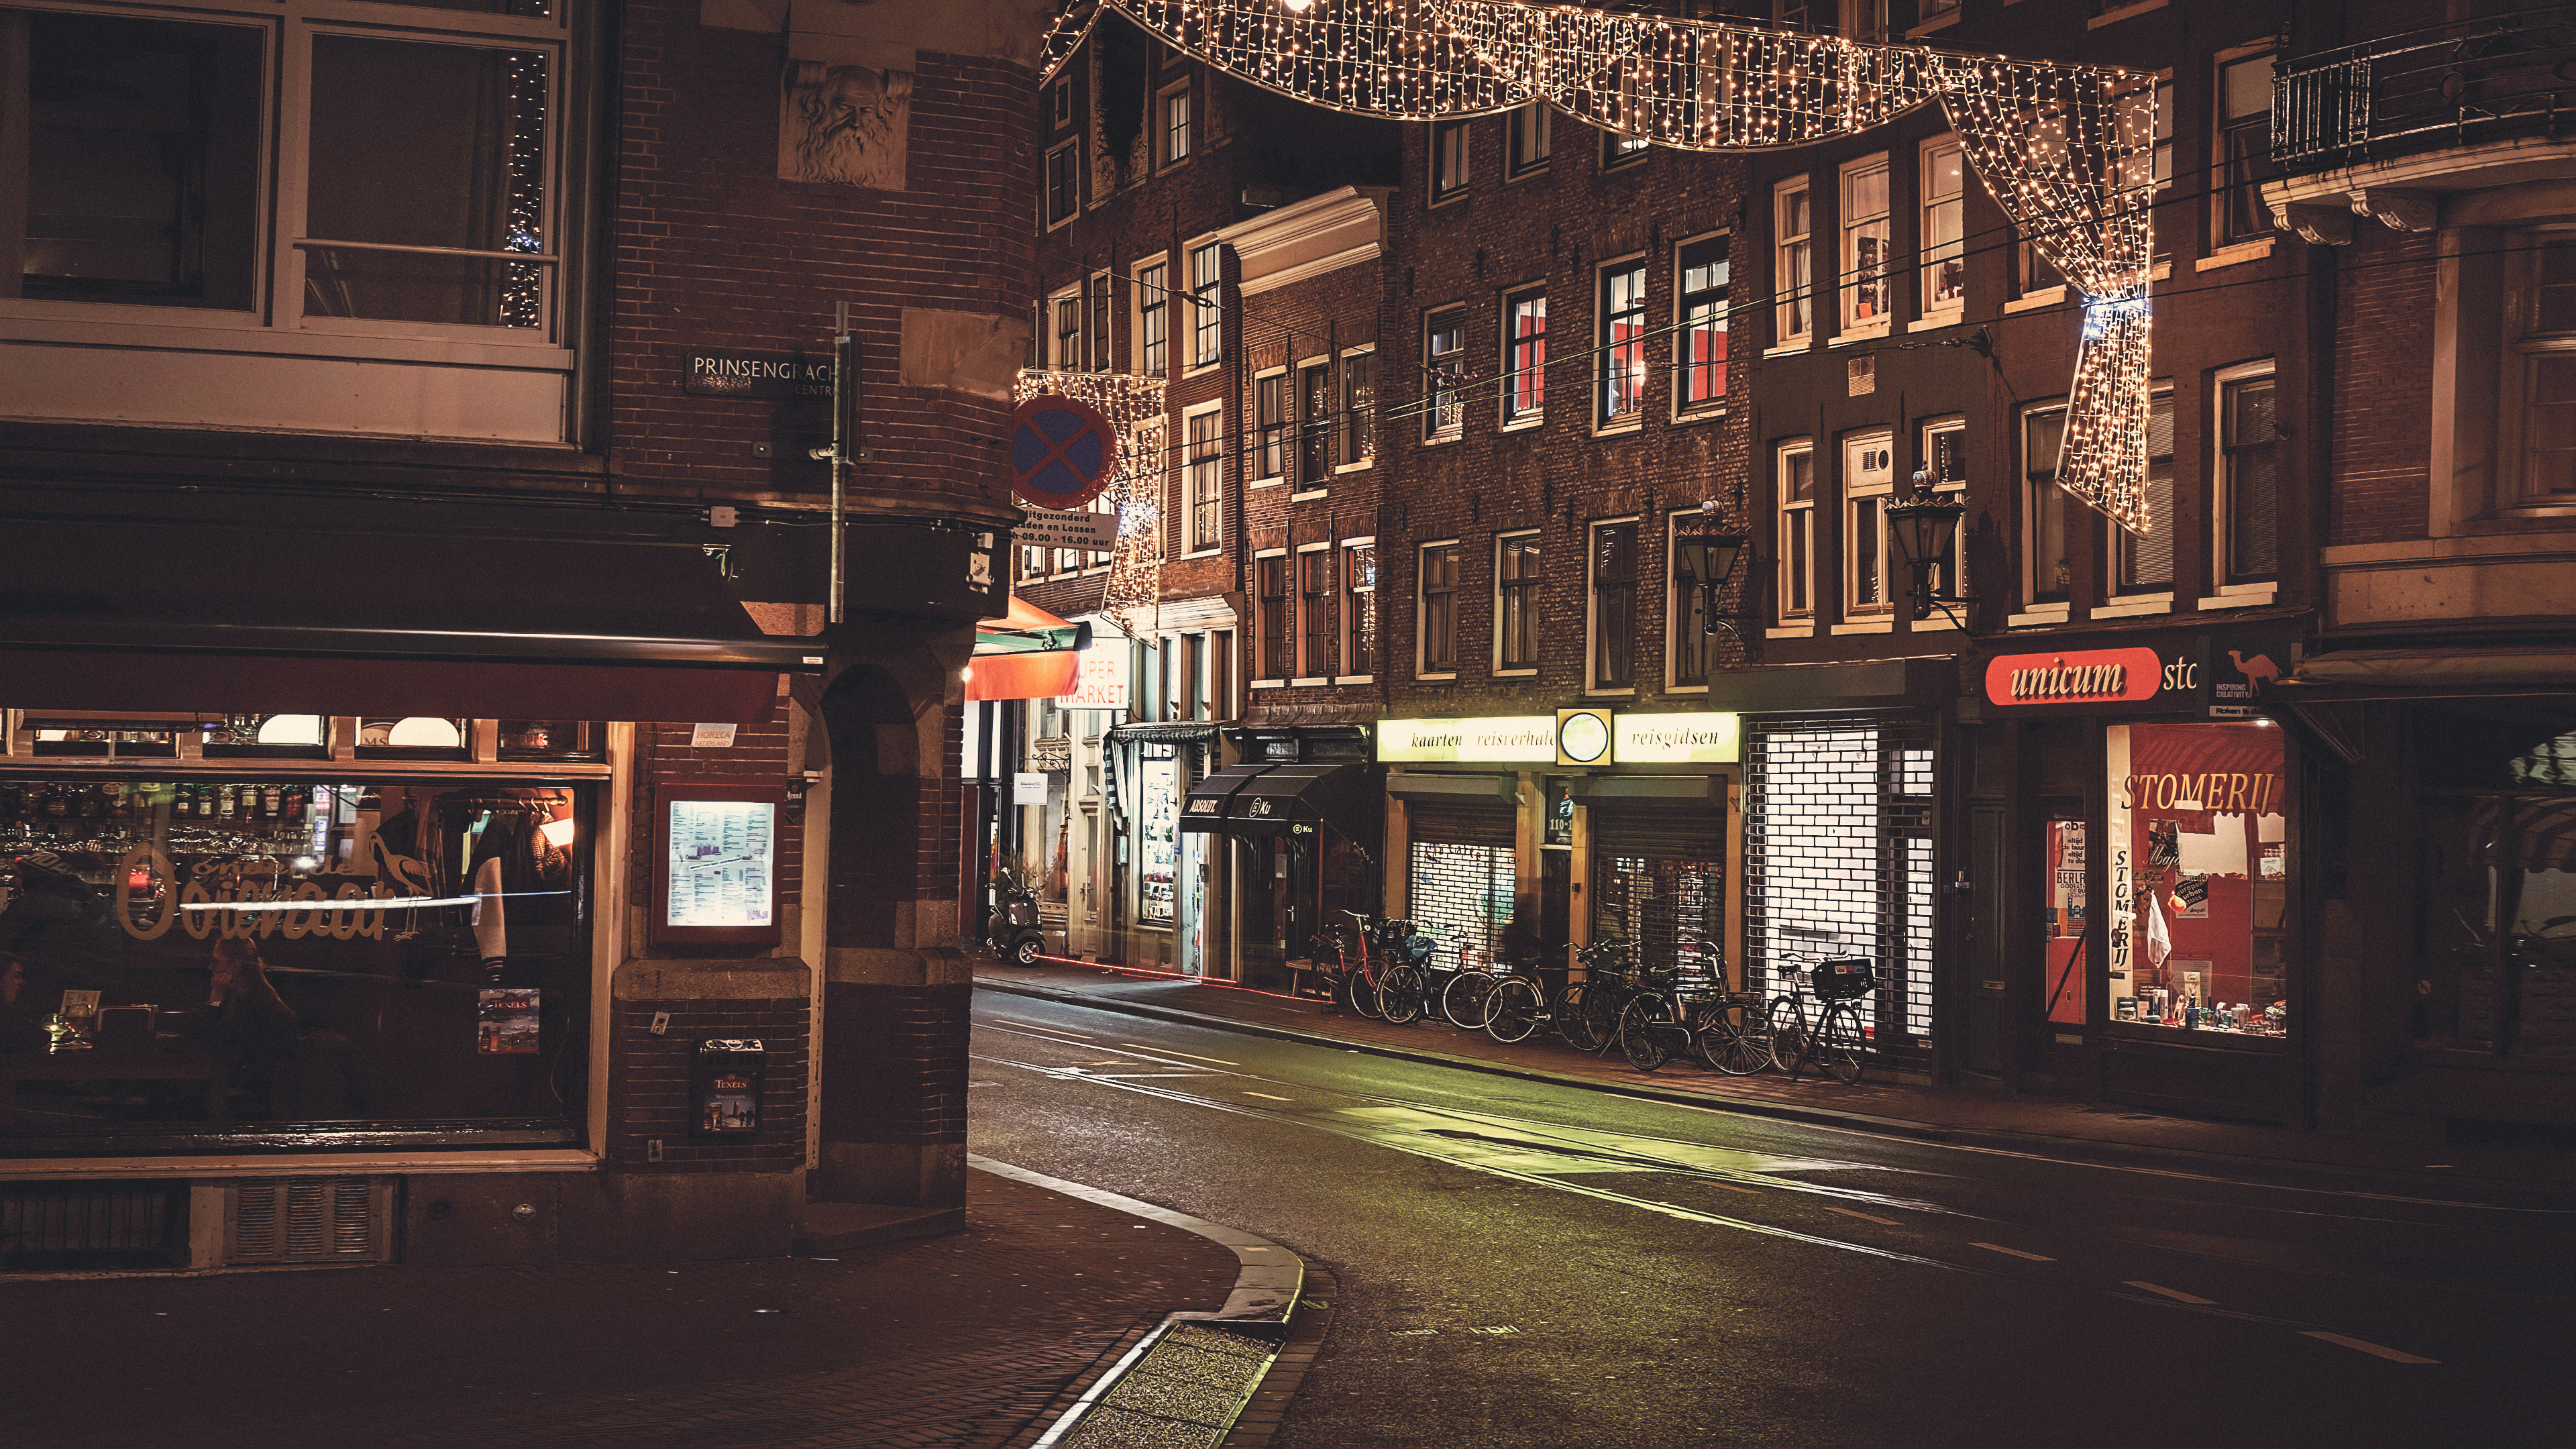 General 3840x2160 Amsterdam Netherlands house street night city road cityscape photography bar